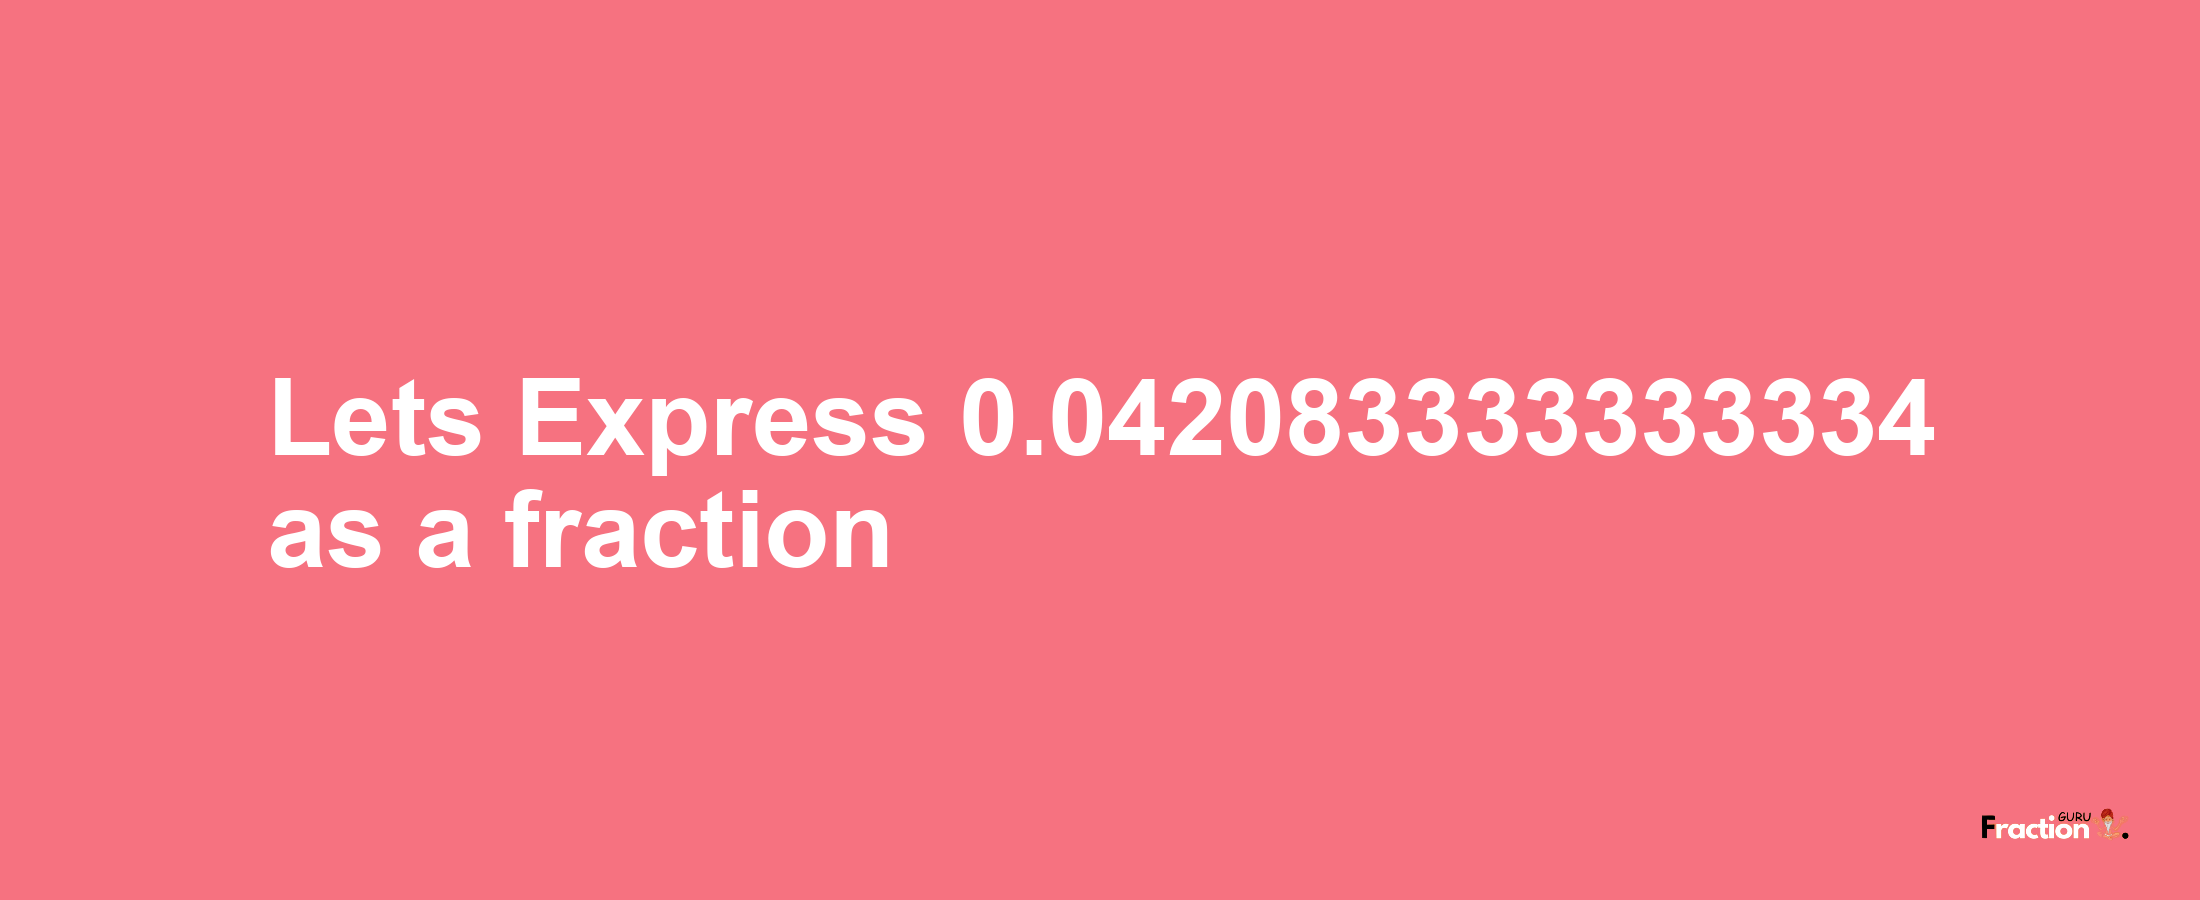 Lets Express 0.042083333333334 as afraction